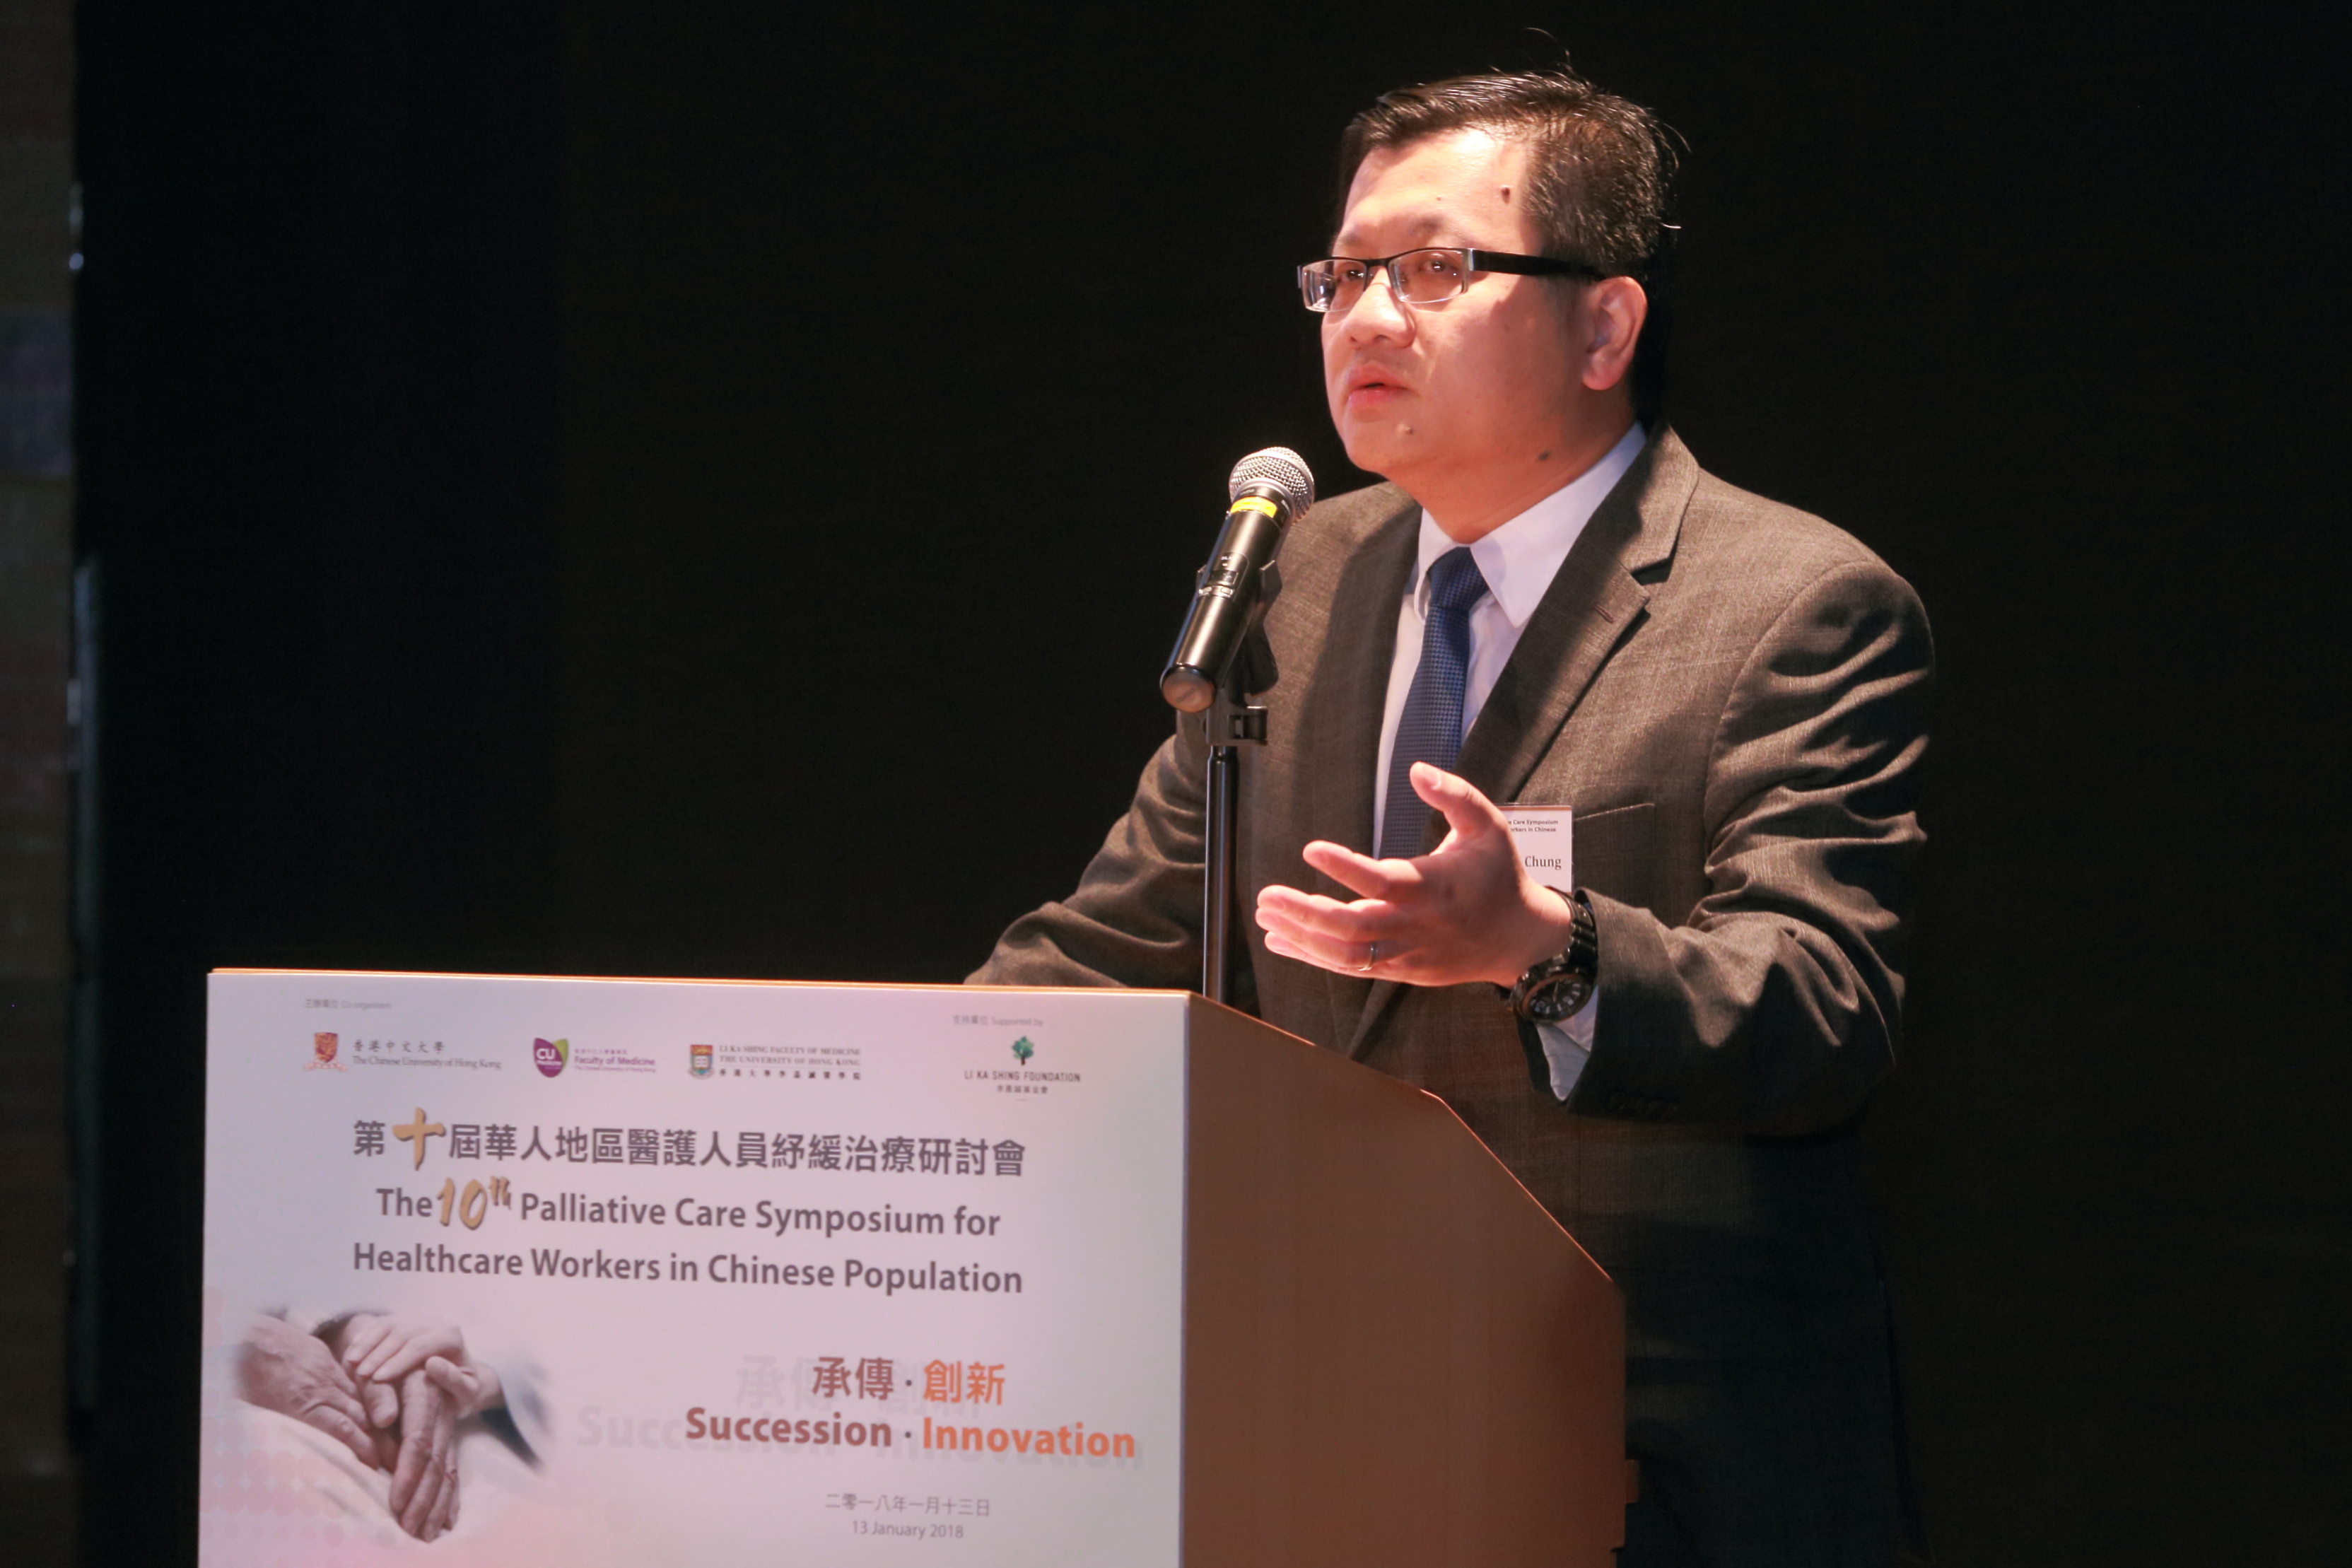 One of the keynote speakers – Dr. Tai Chung LAM, Clinical Assistant Professor of the Department of Clinical Oncology of the Li Ka Shing Faculty of Medicine at HKU, shares on ‘A 10-Year Territory-wide Review on Oncology Palliative Care Service in Public Cancer Centres: Identifying the Challenges Ahead’.